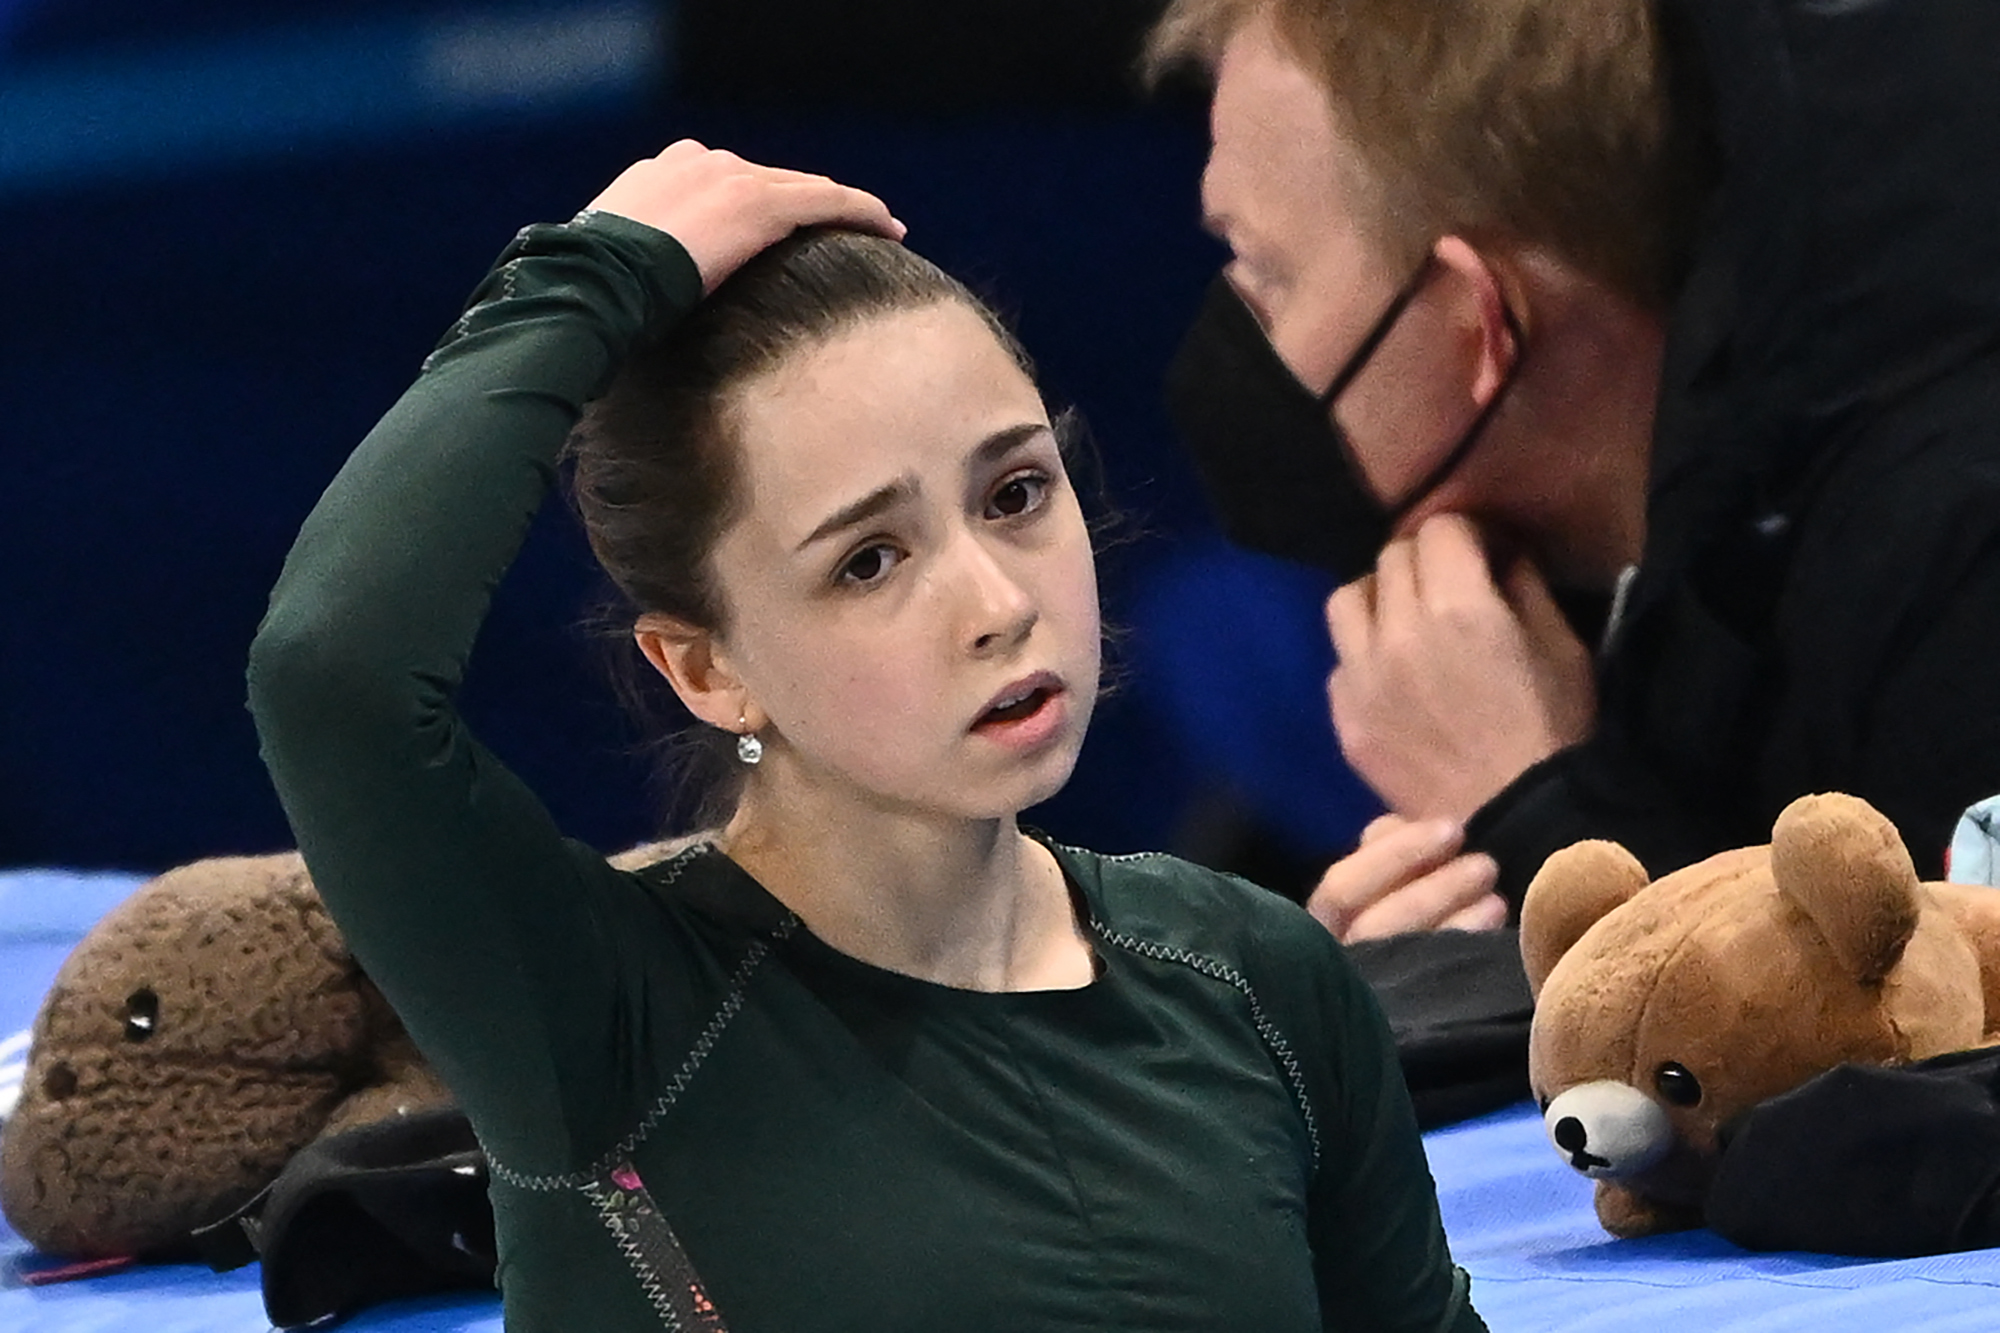 Why Would a 15-Year-Old Star Figure Skater Take Heart Medicine?